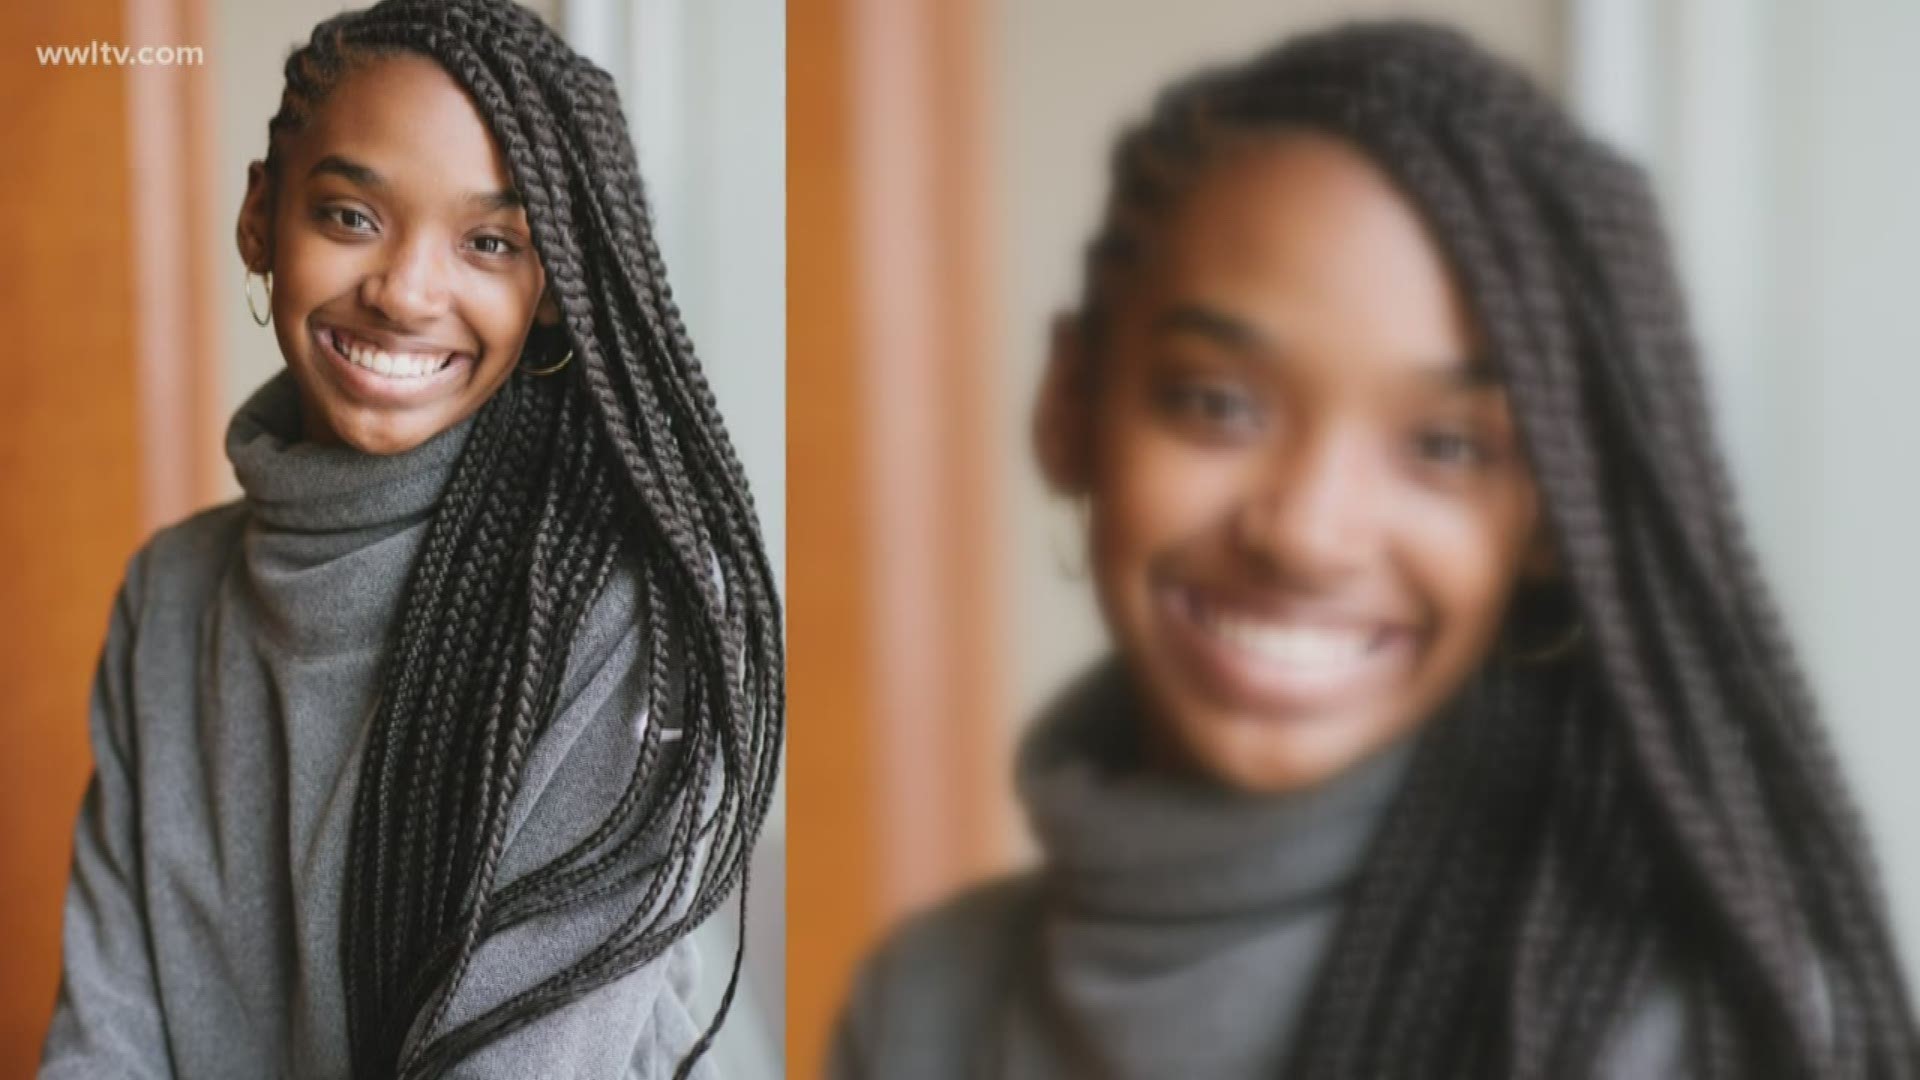 Sheba shines a light on an impactful program that has helped many low income students achieve their college dream including one student who has  successfully been accepted into 3 ivy league schools.